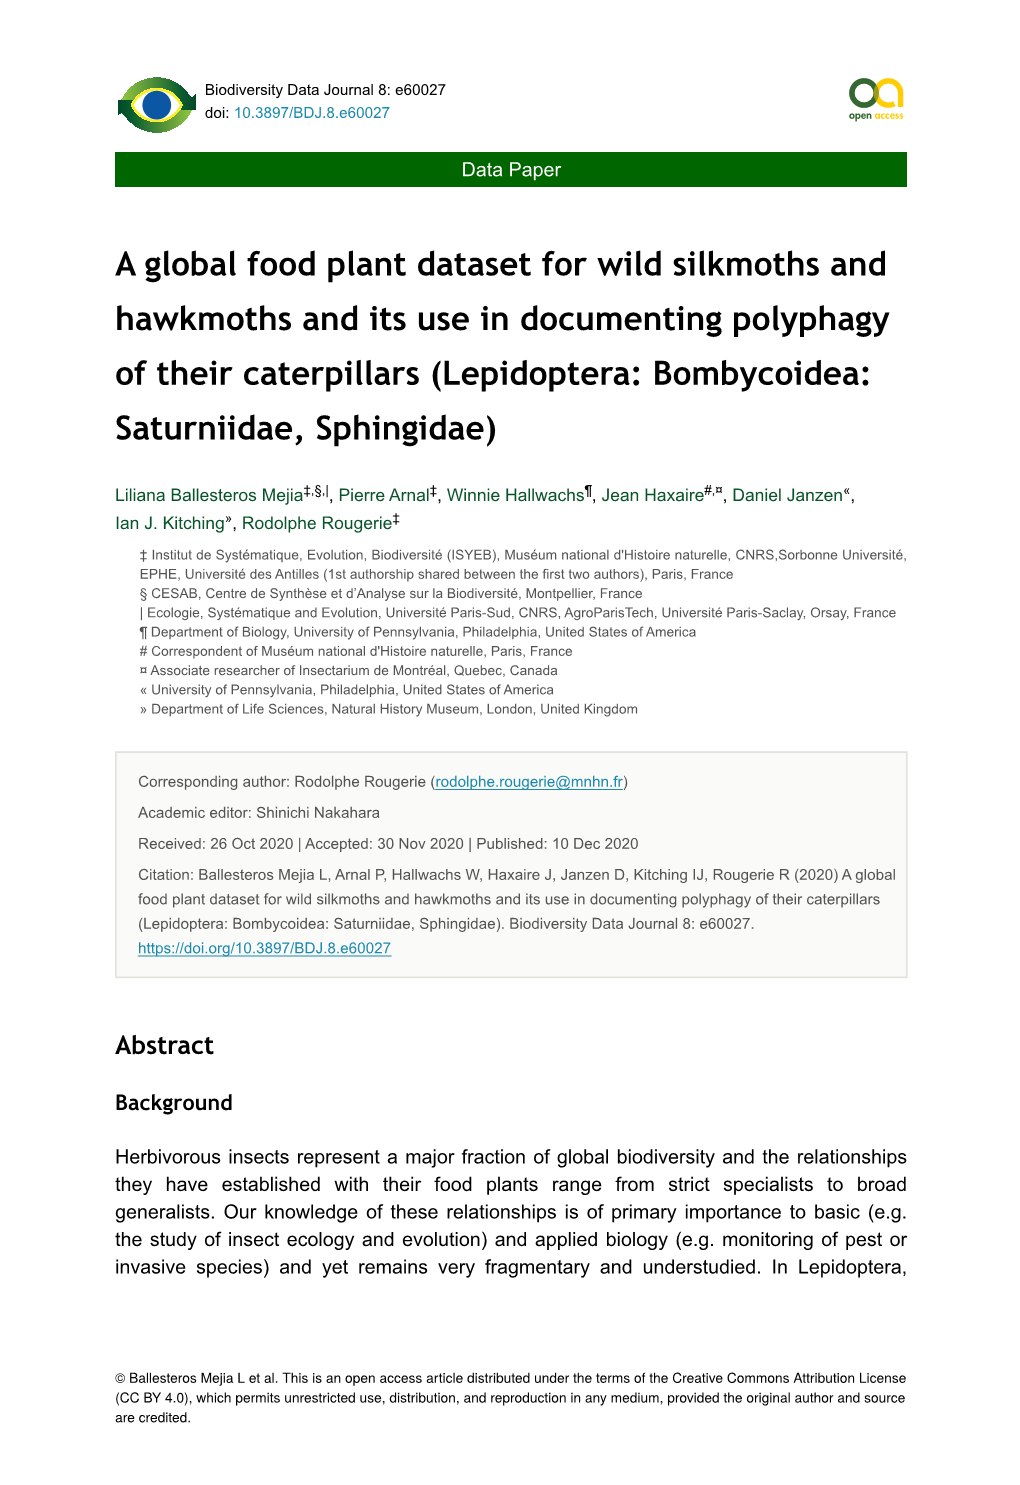 A Global Food Plant Dataset for Wild